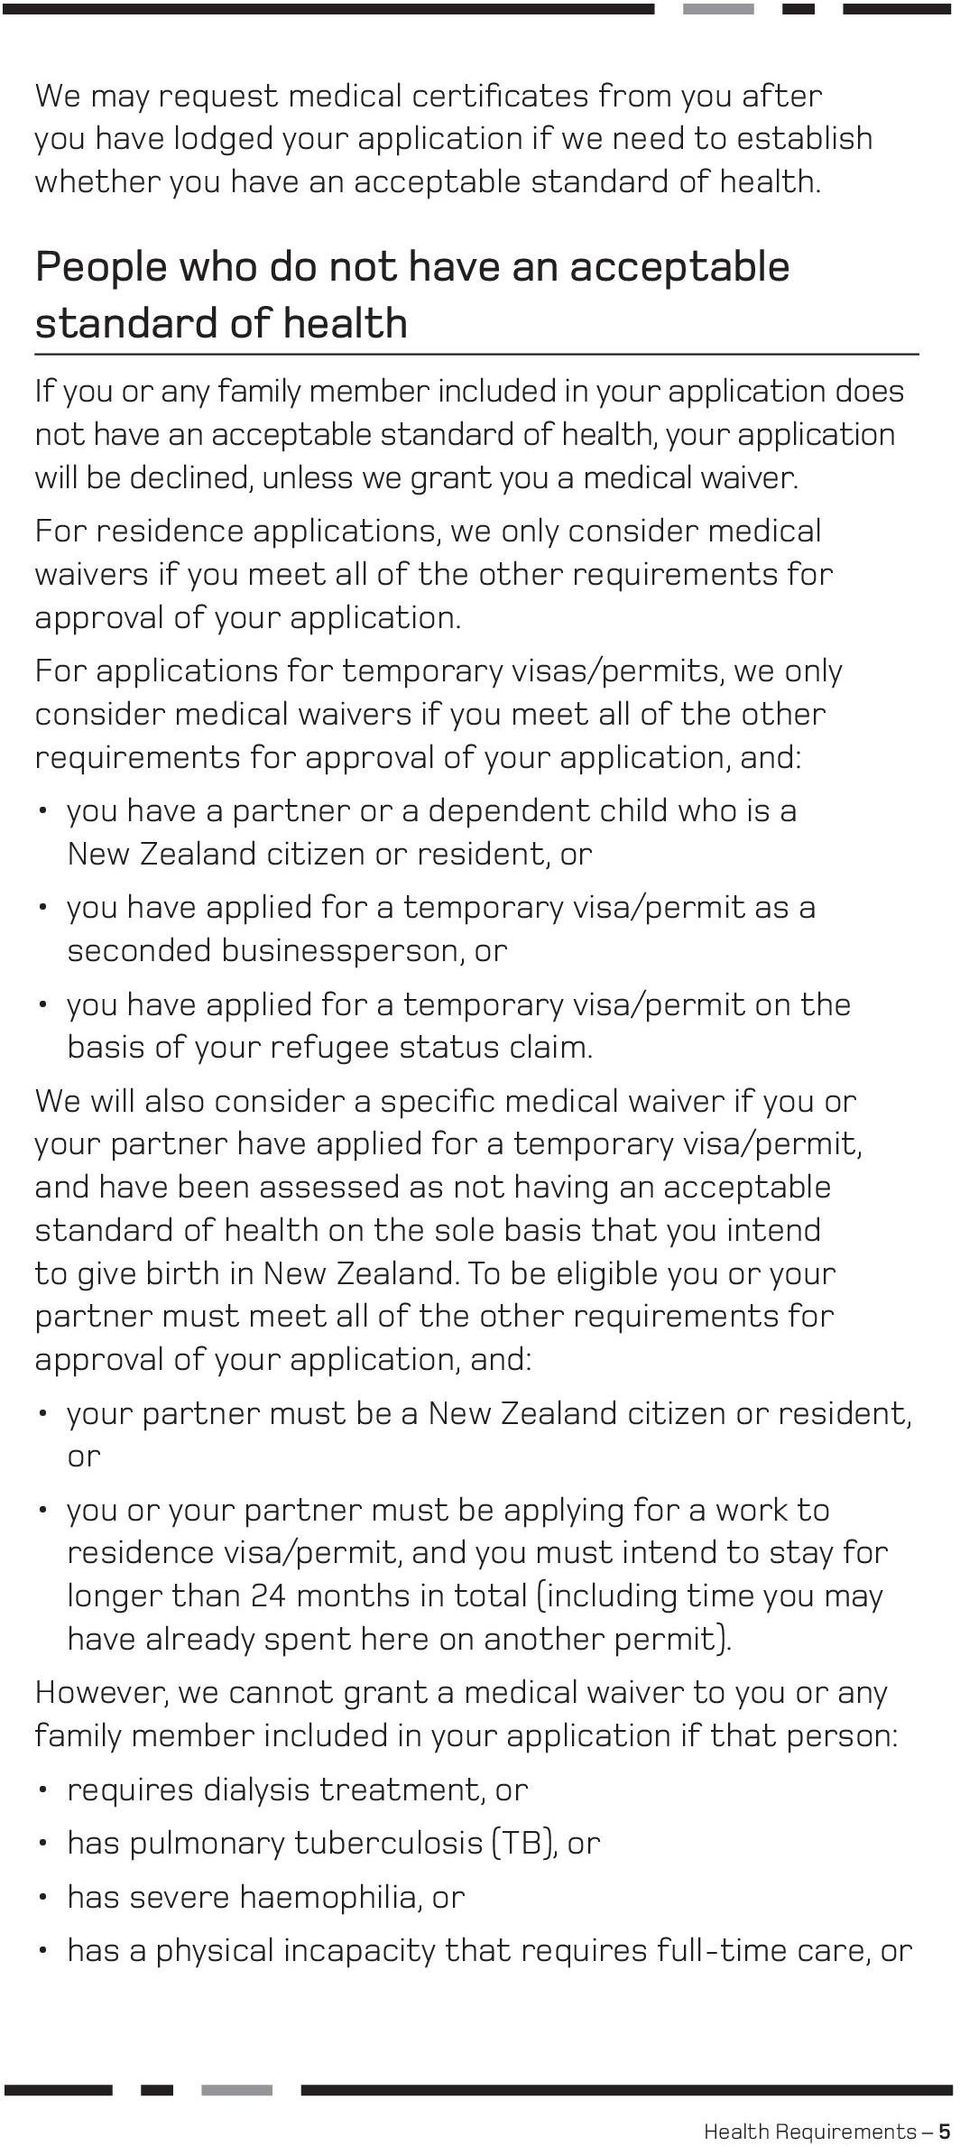 unless we grant you a medical waiver. For residence applications, we only consider medical waivers if you meet all of the other requirements for approval of your application.